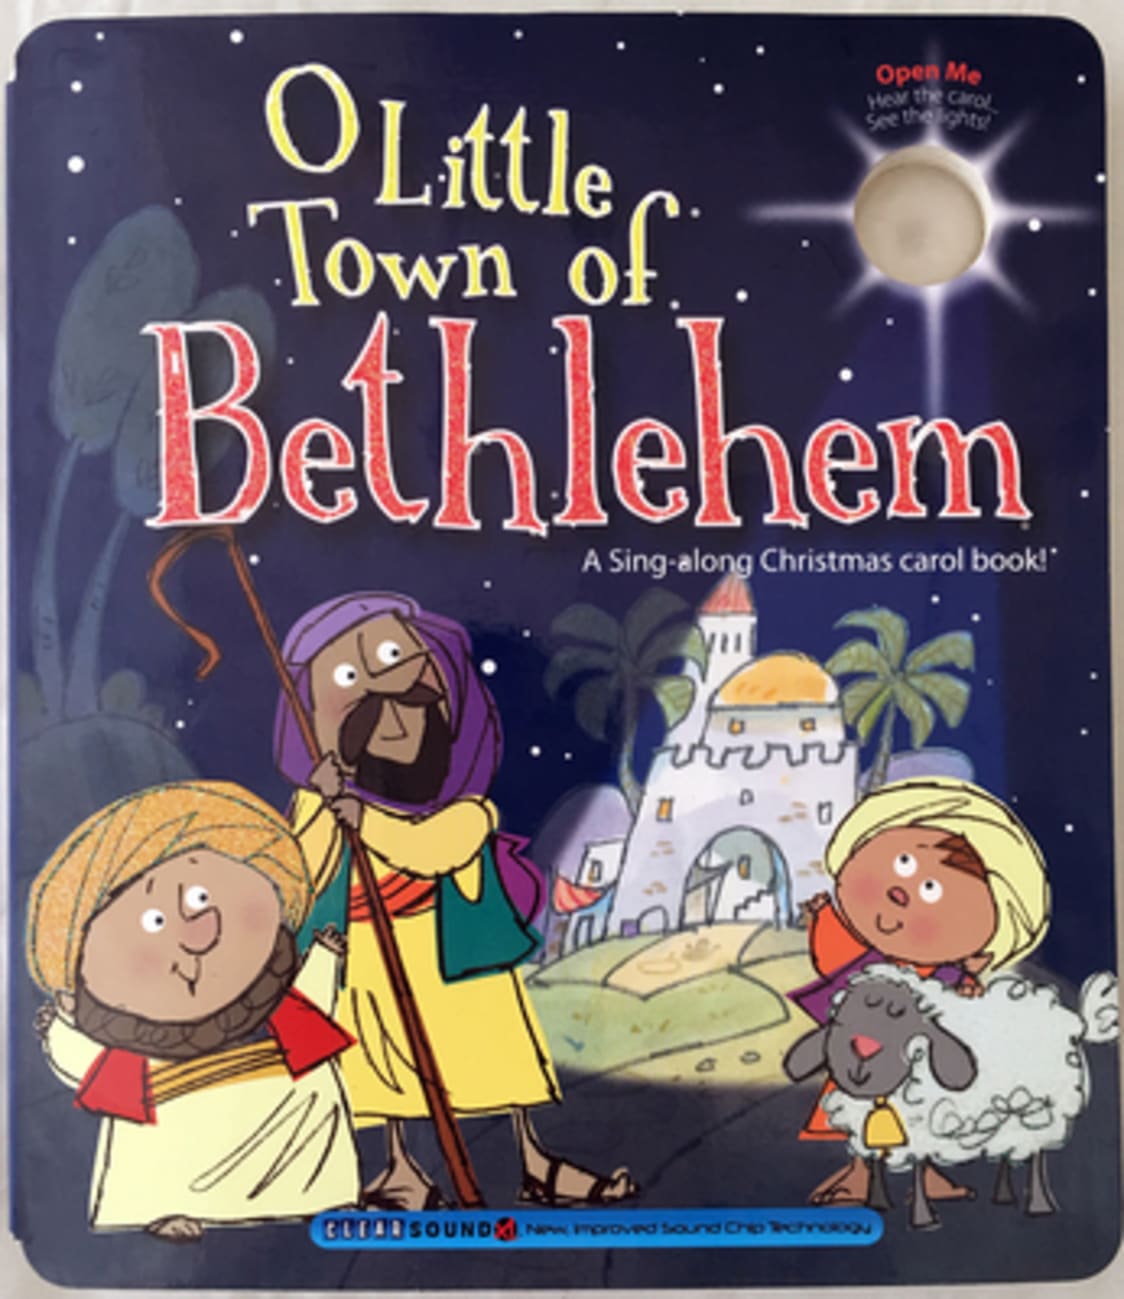 O Little Town of Bethlehem (A Christmas Carol Book Series) by Ron Berry  Koorong